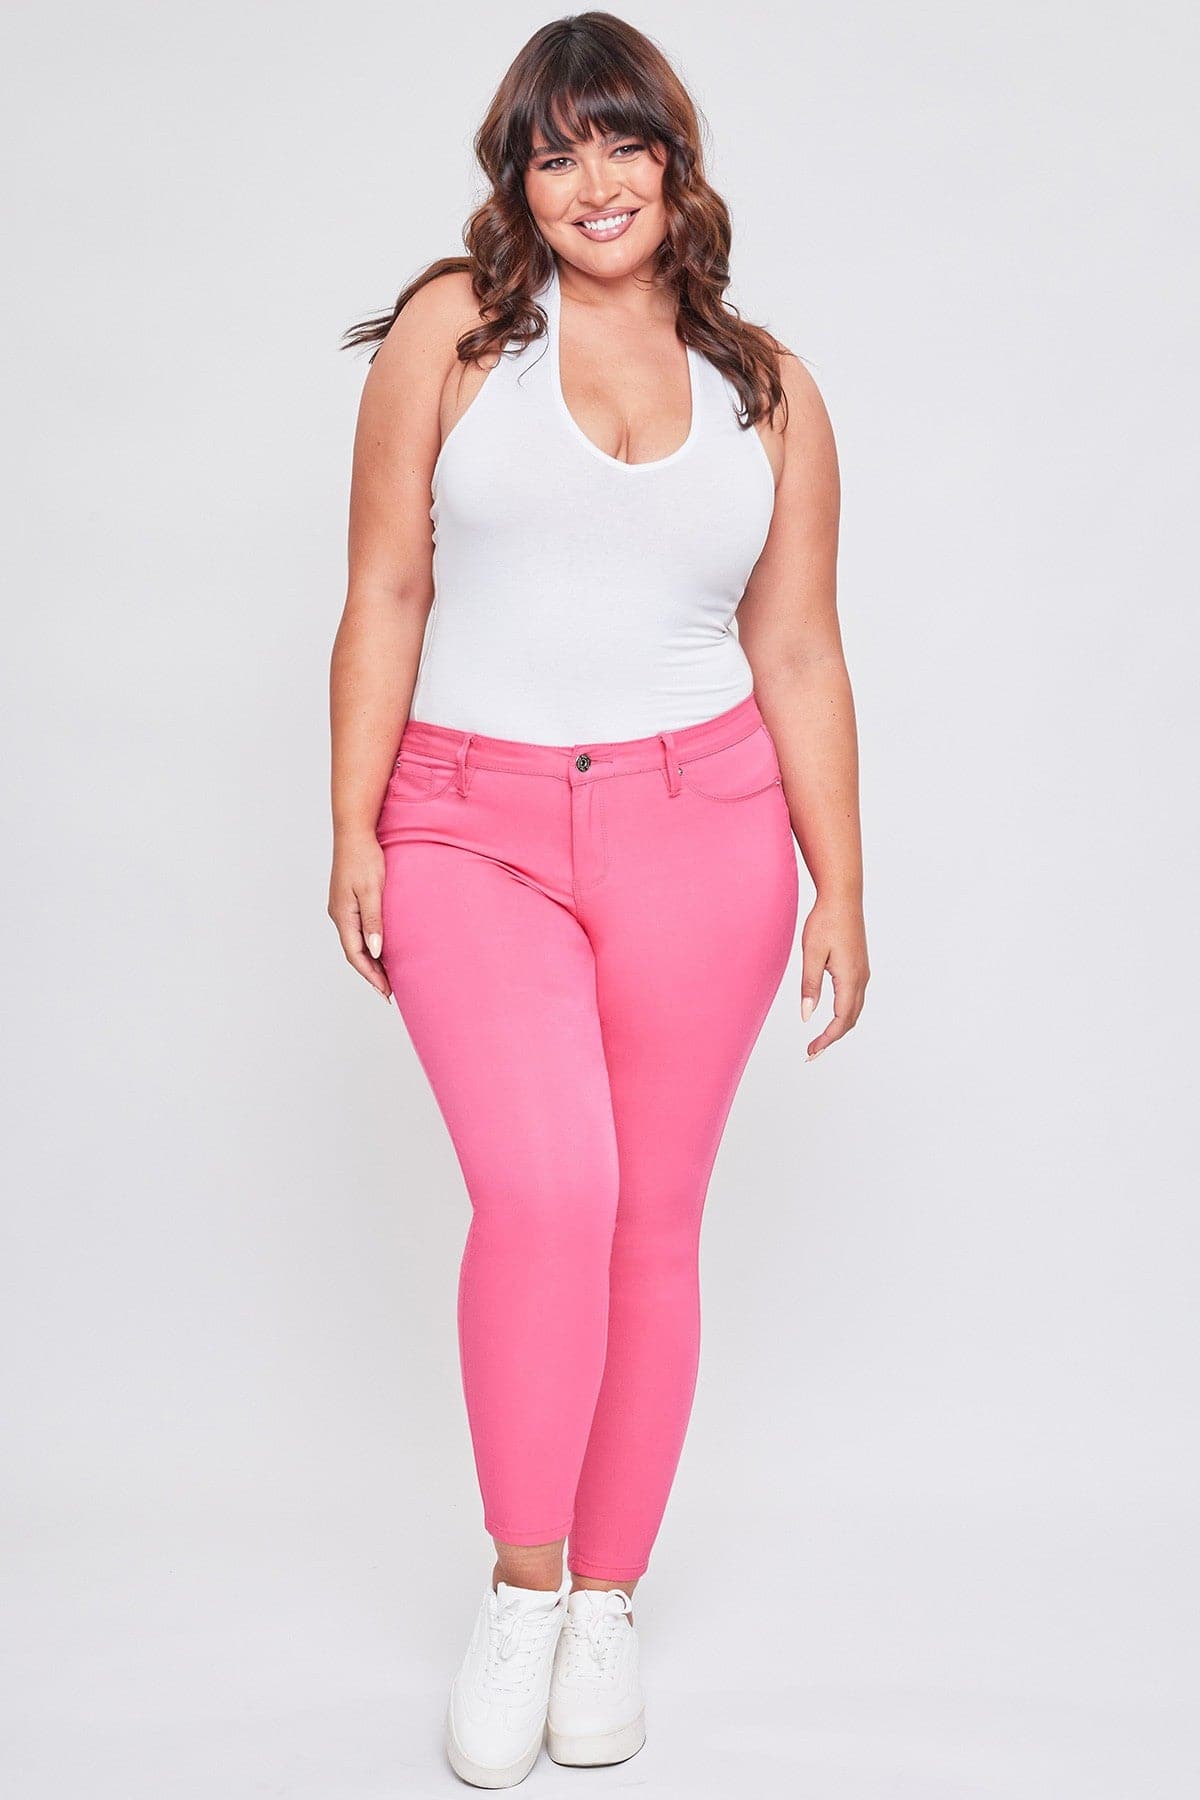 Plus Size Women's Hyperstretch  Forever Color Pants - Bright